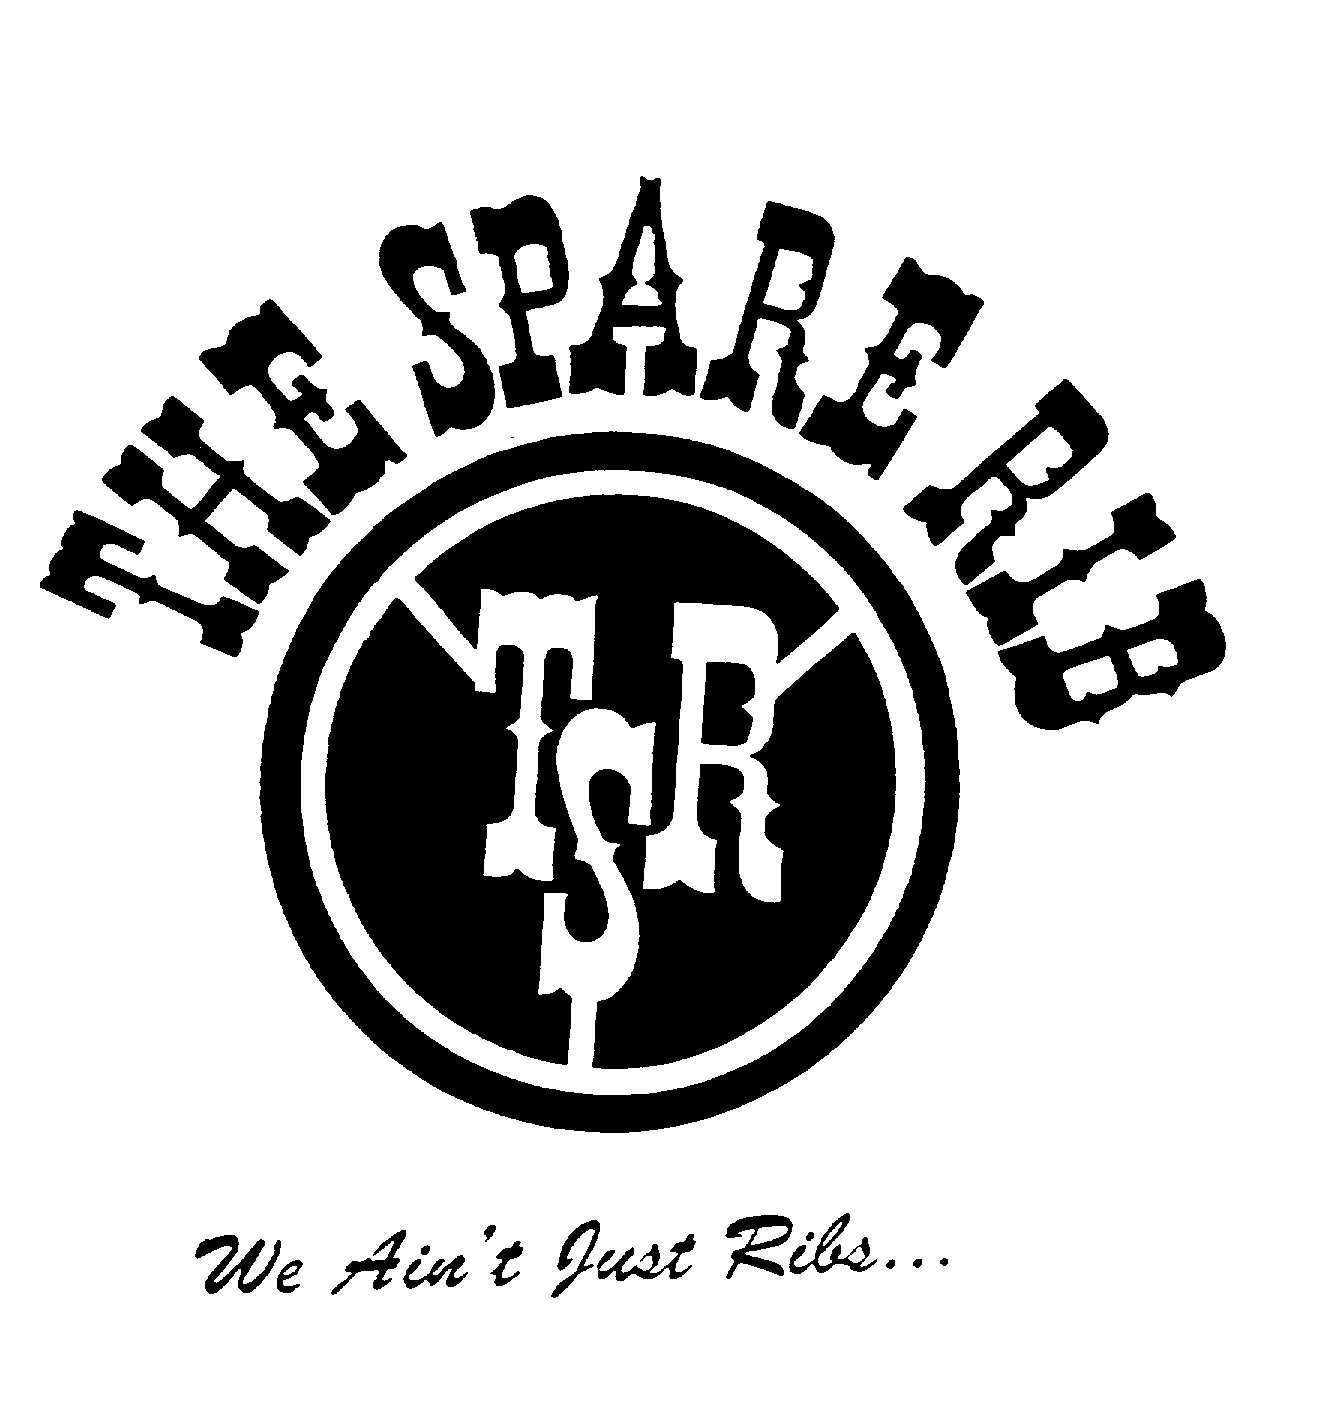  TSR THE SPARE RIB WE AIN'T JUST RIBS